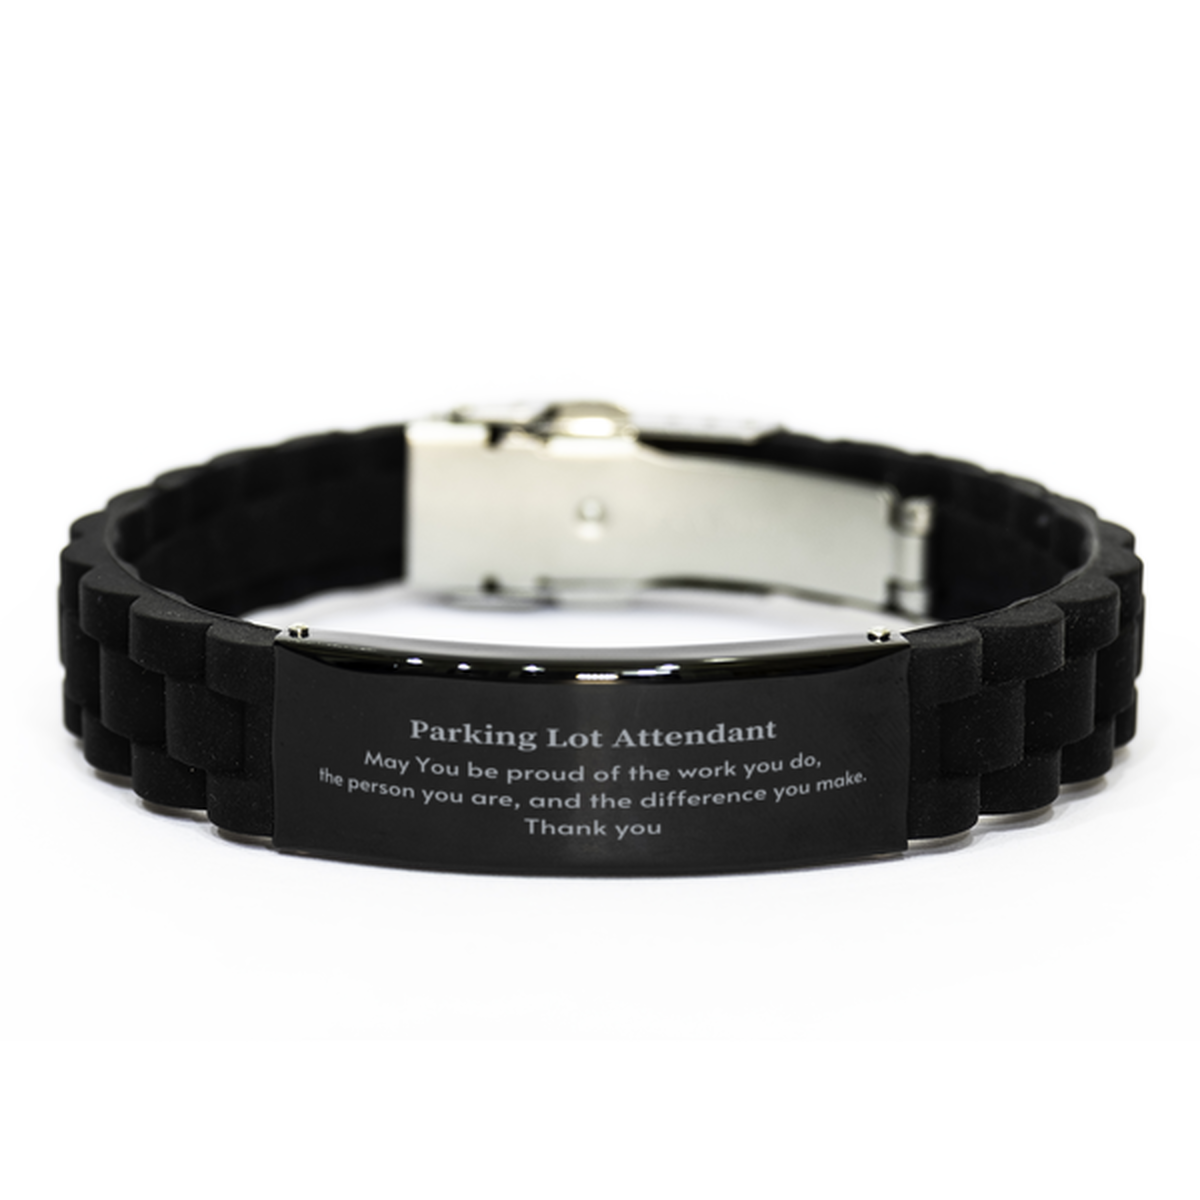 Heartwarming Black Glidelock Clasp Bracelet Retirement Coworkers Gifts for Parking Lot Attendant, Parking Lot Attendant May You be proud of the work you do, the person you are Gifts for Boss Men Women Friends